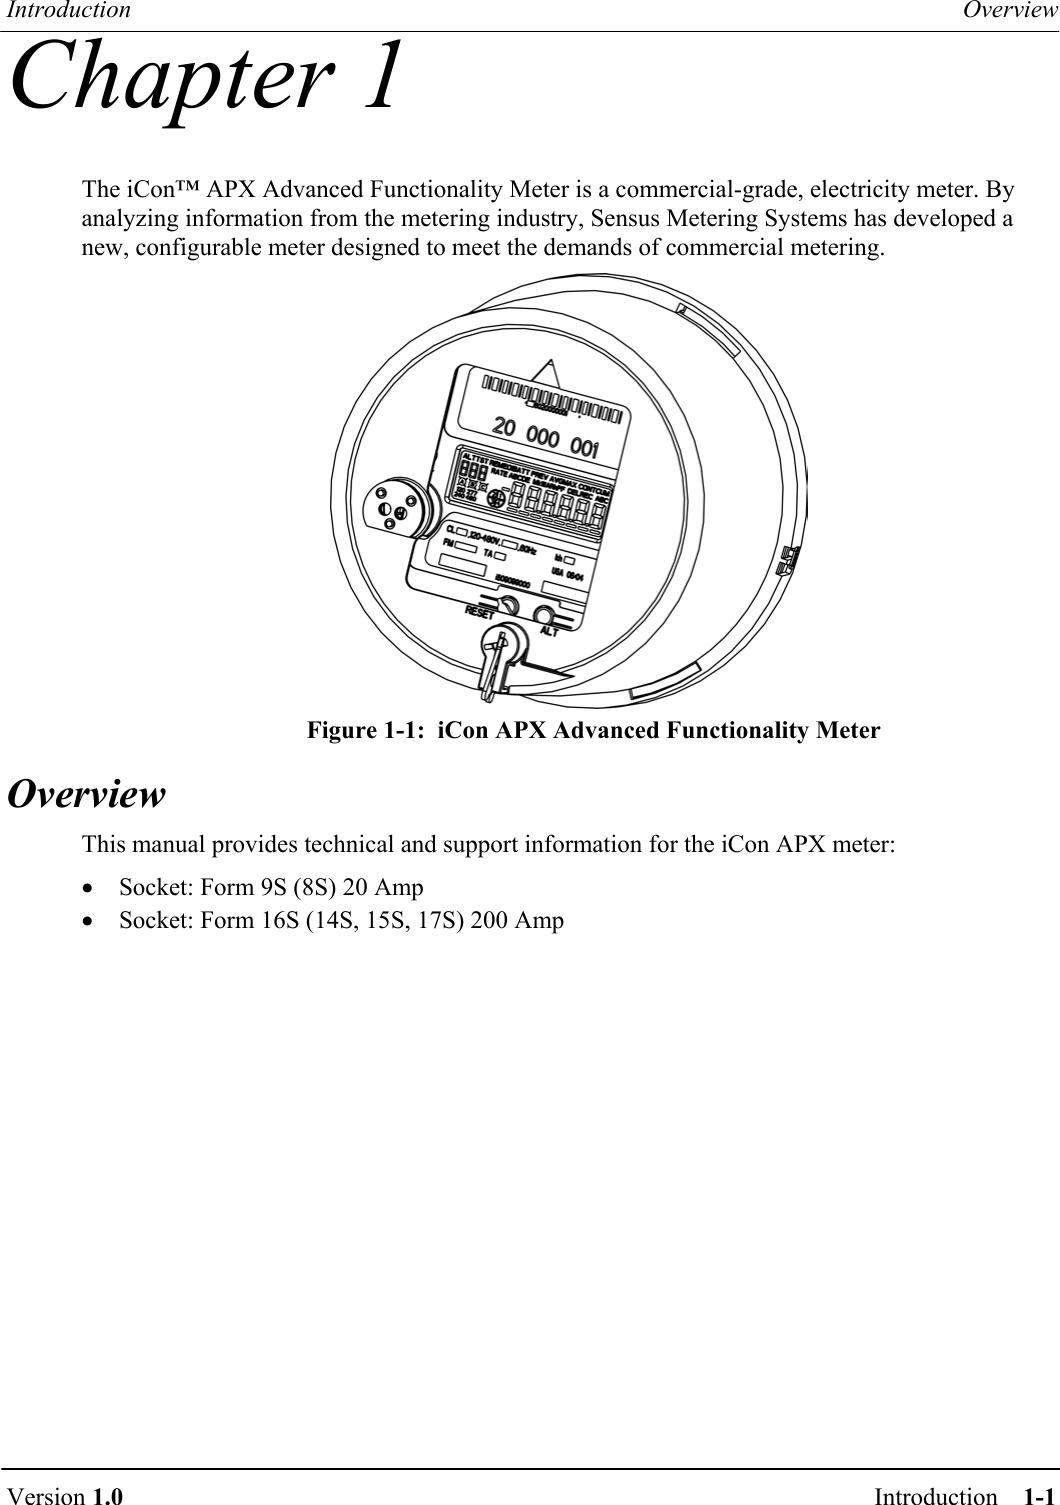 Introduction  Overview  Version 1.0  Introduction    1-1    Chapter 1 The iCon™ APX Advanced Functionality Meter is a commercial-grade, electricity meter. By analyzing information from the metering industry, Sensus Metering Systems has developed a new, configurable meter designed to meet the demands of commercial metering.  Figure 1-1:  iCon APX Advanced Functionality Meter Overview This manual provides technical and support information for the iCon APX meter: •  Socket: Form 9S (8S) 20 Amp •  Socket: Form 16S (14S, 15S, 17S) 200 Amp 